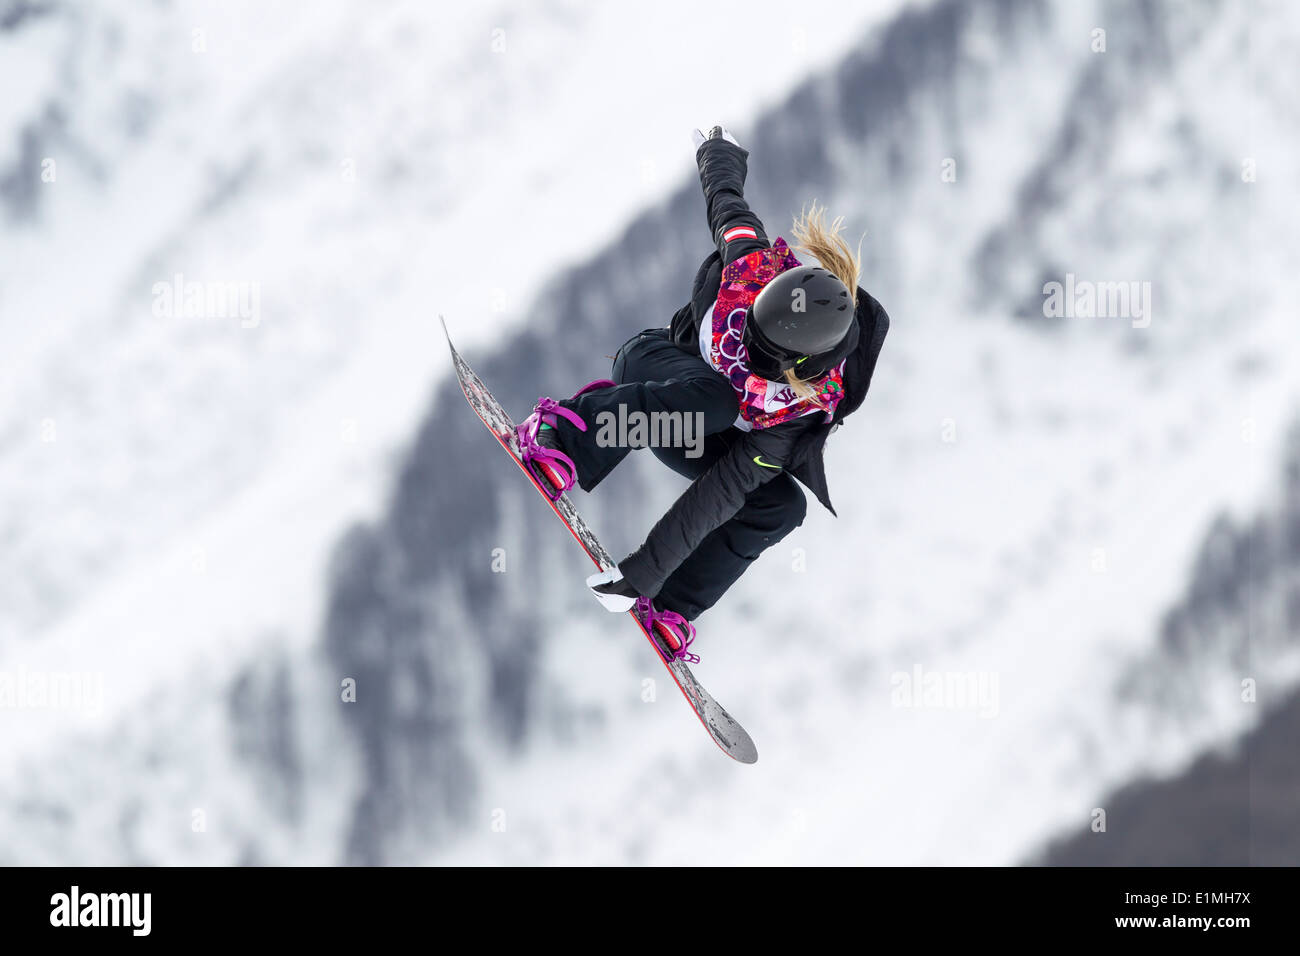 Anna Gasser (AUT) competing in Ladies's Snowboard Slopestyle at the Olympic Winter Games, Sochi 2014 Stock Photo